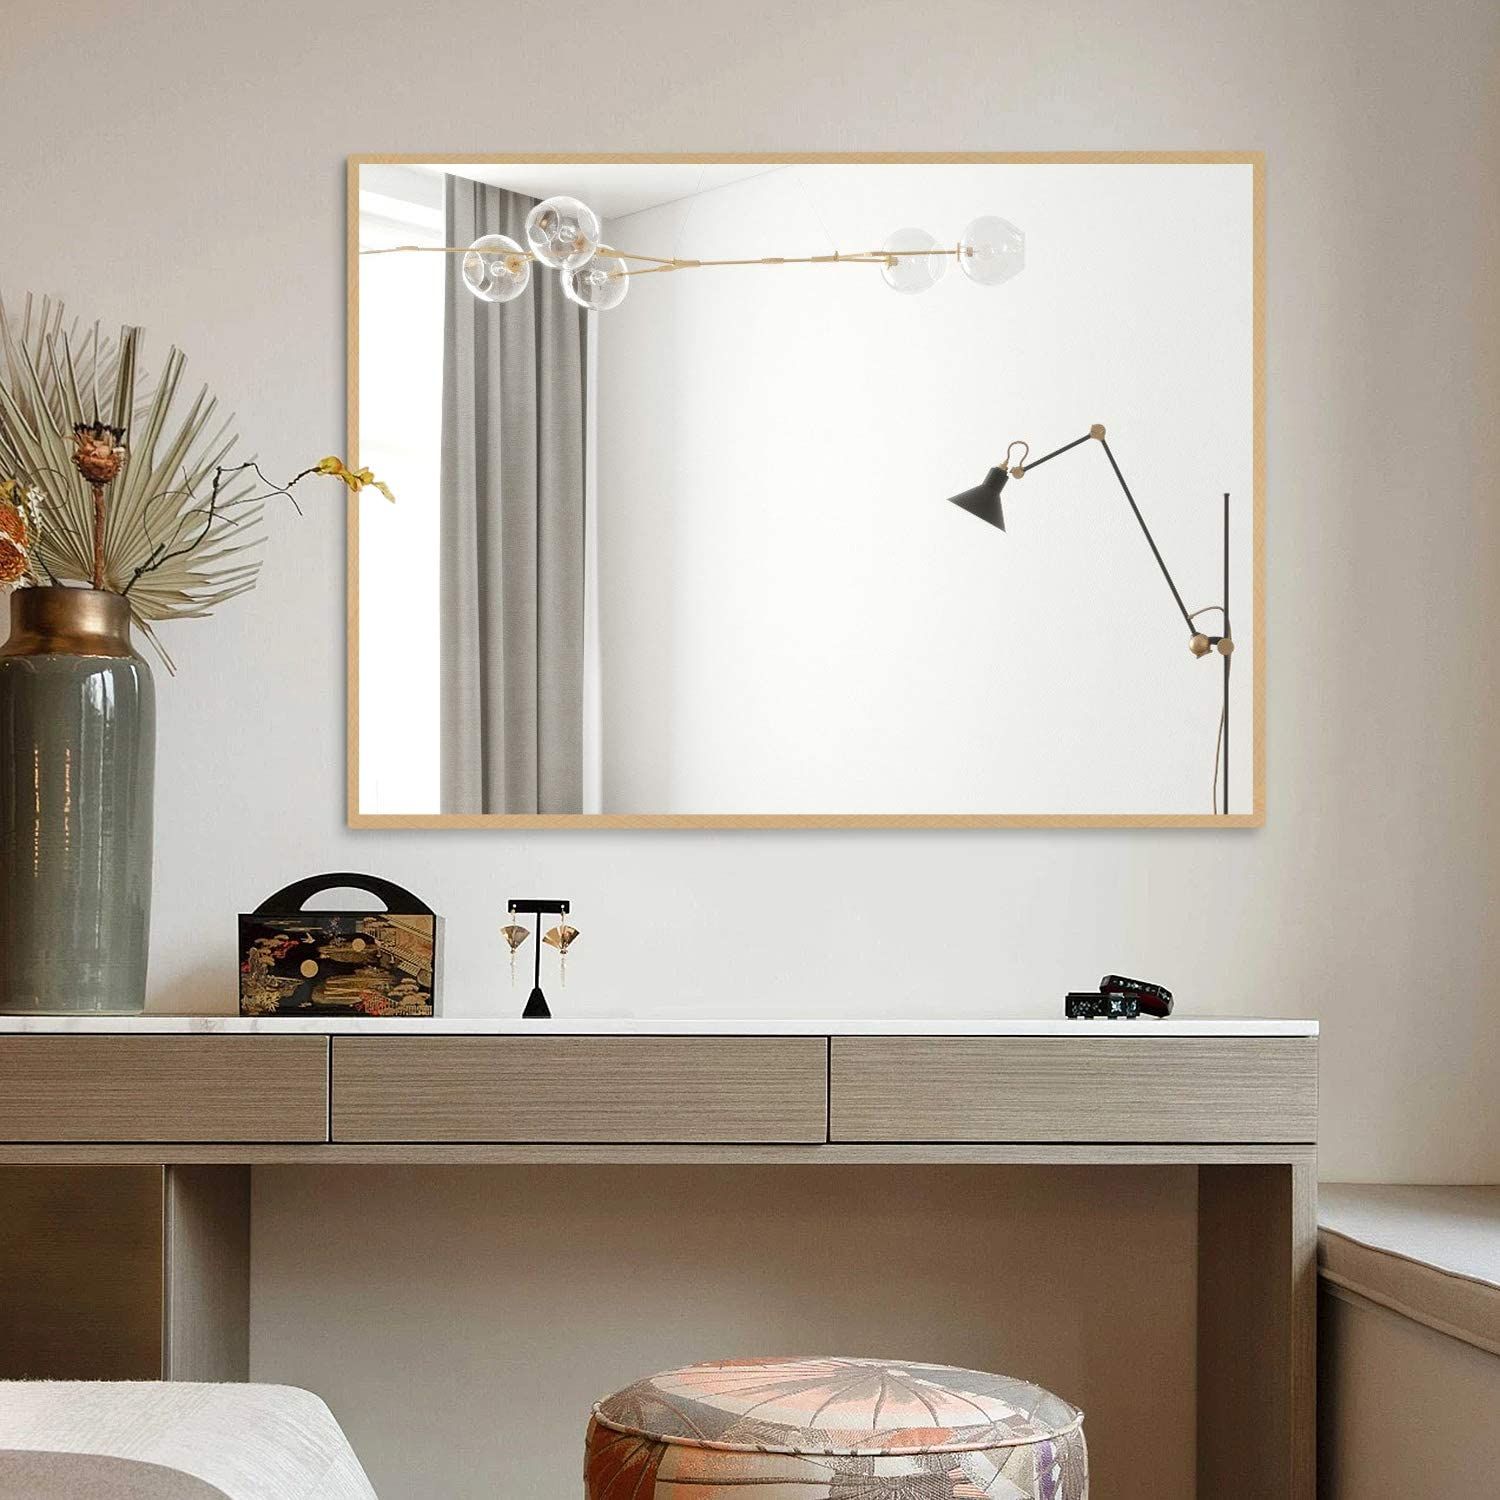 Mirrors For Wall Decor Rectangular Mirror Bathroom Wall Mounted Make Up Inside Clear Wall Mirrors (View 2 of 15)